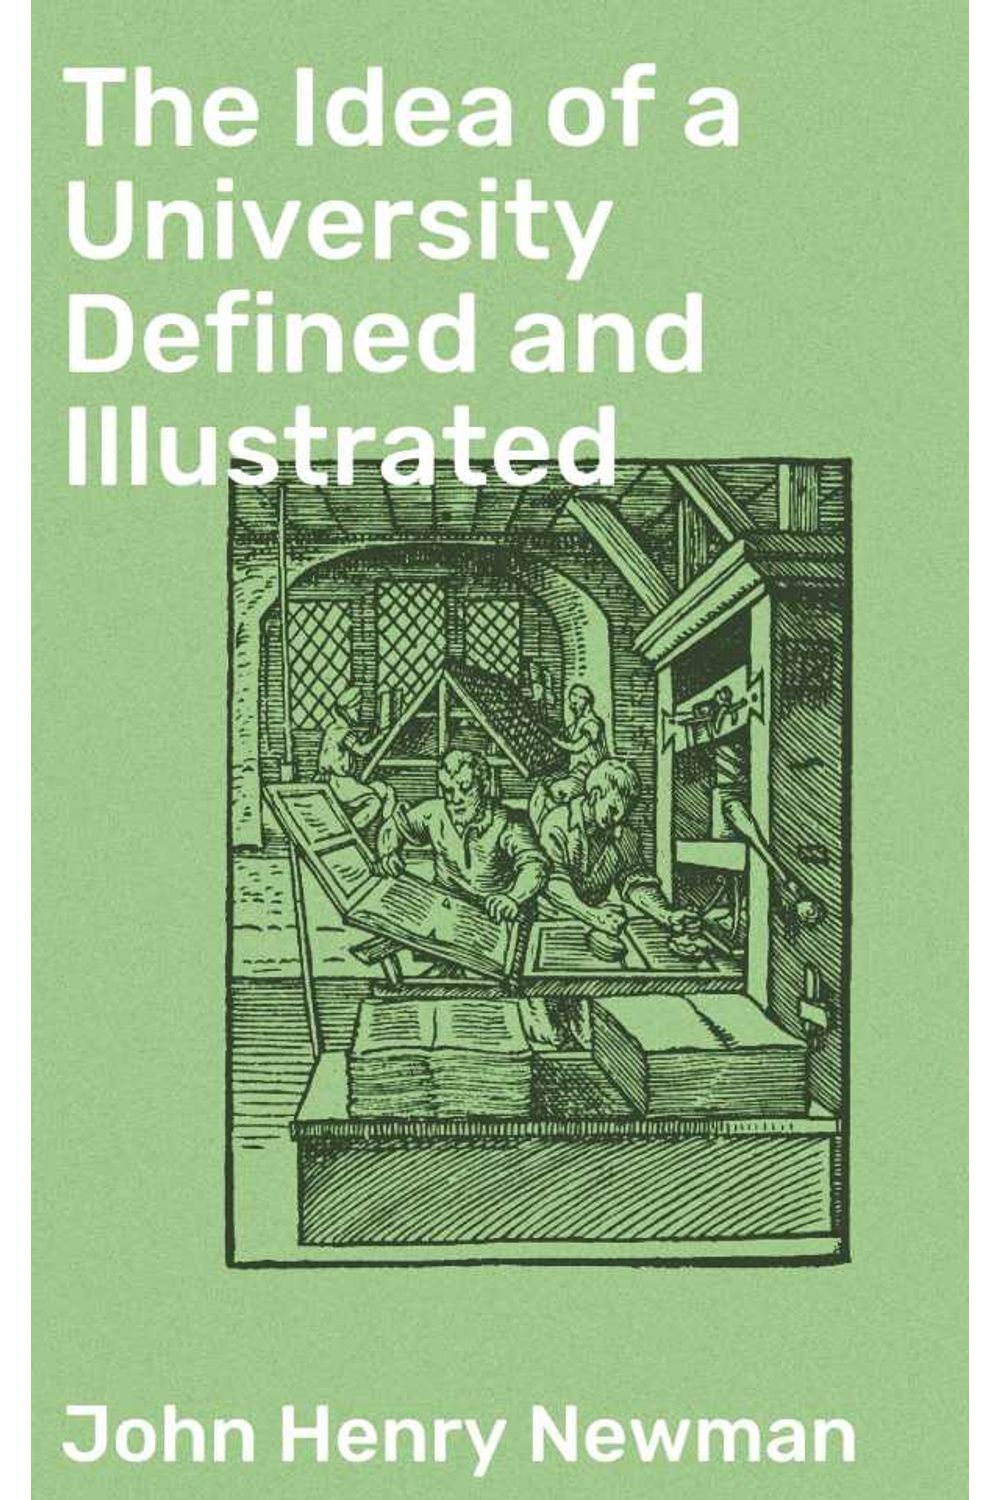 bw-the-idea-of-a-university-defined-and-illustrated-good-press-4064066104757